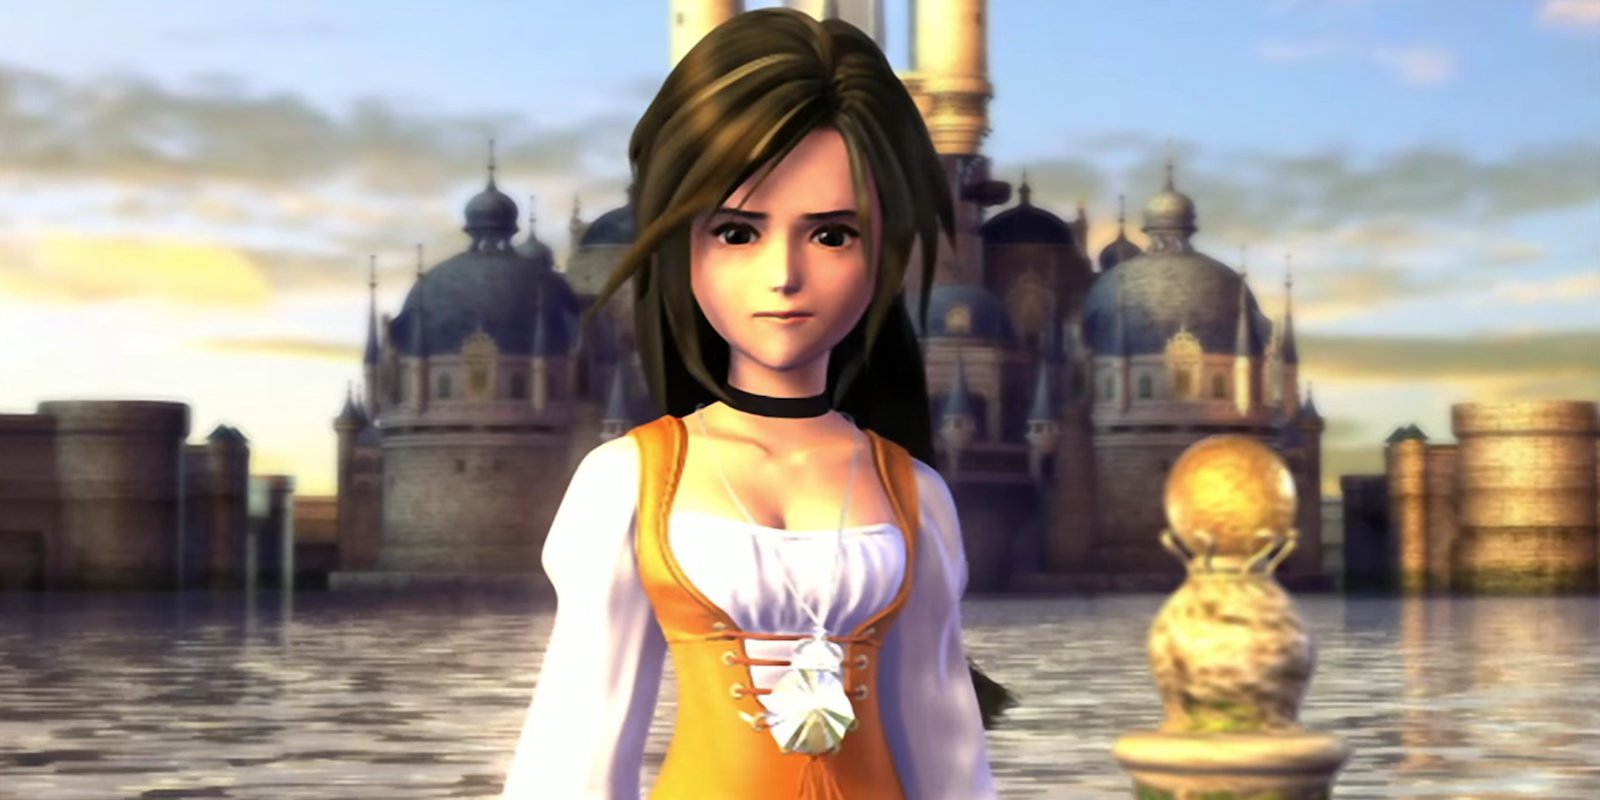 Final Fantasy IX Is Getting a PC and Mobile Release